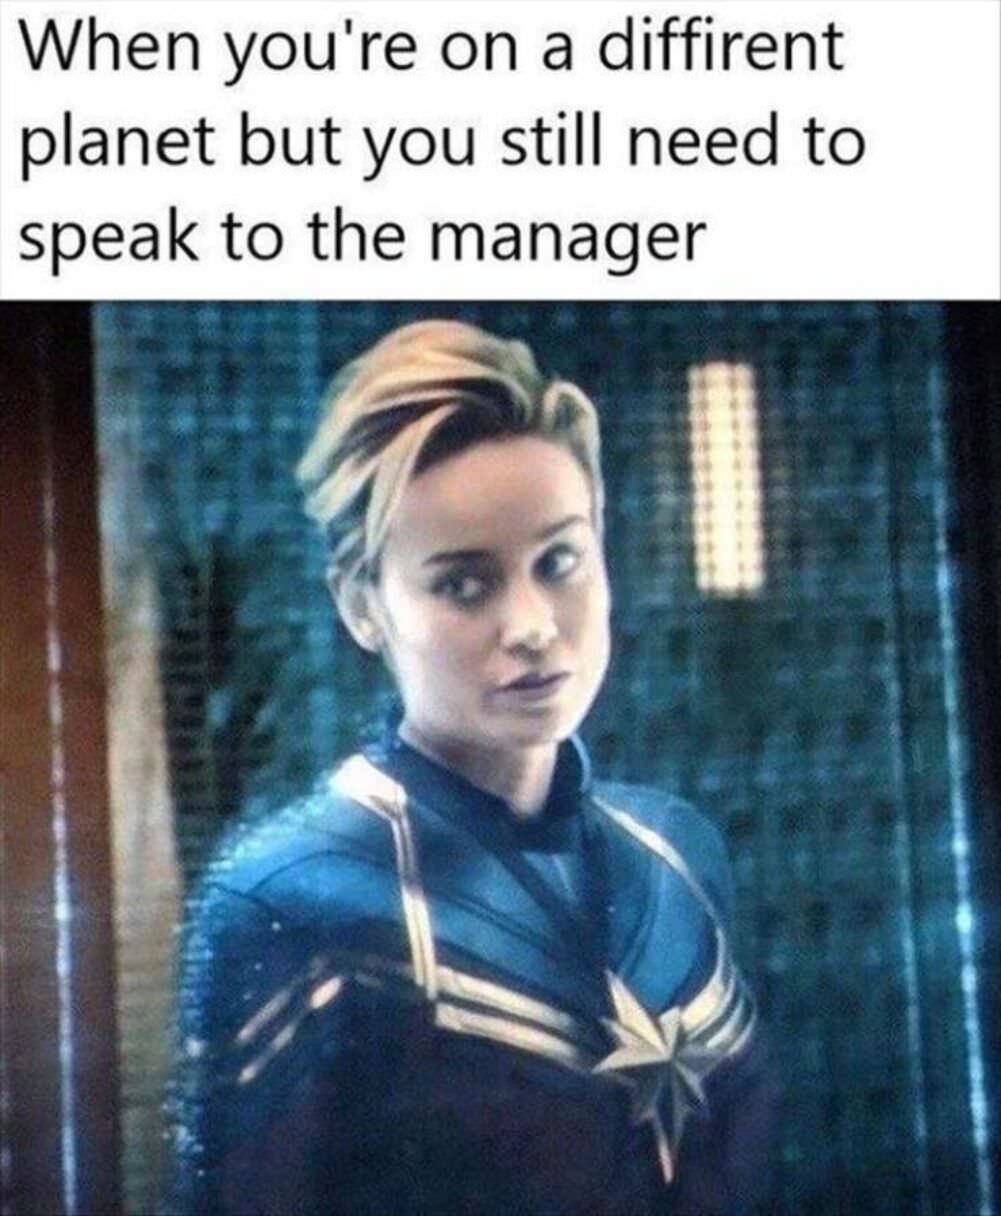 the manager please